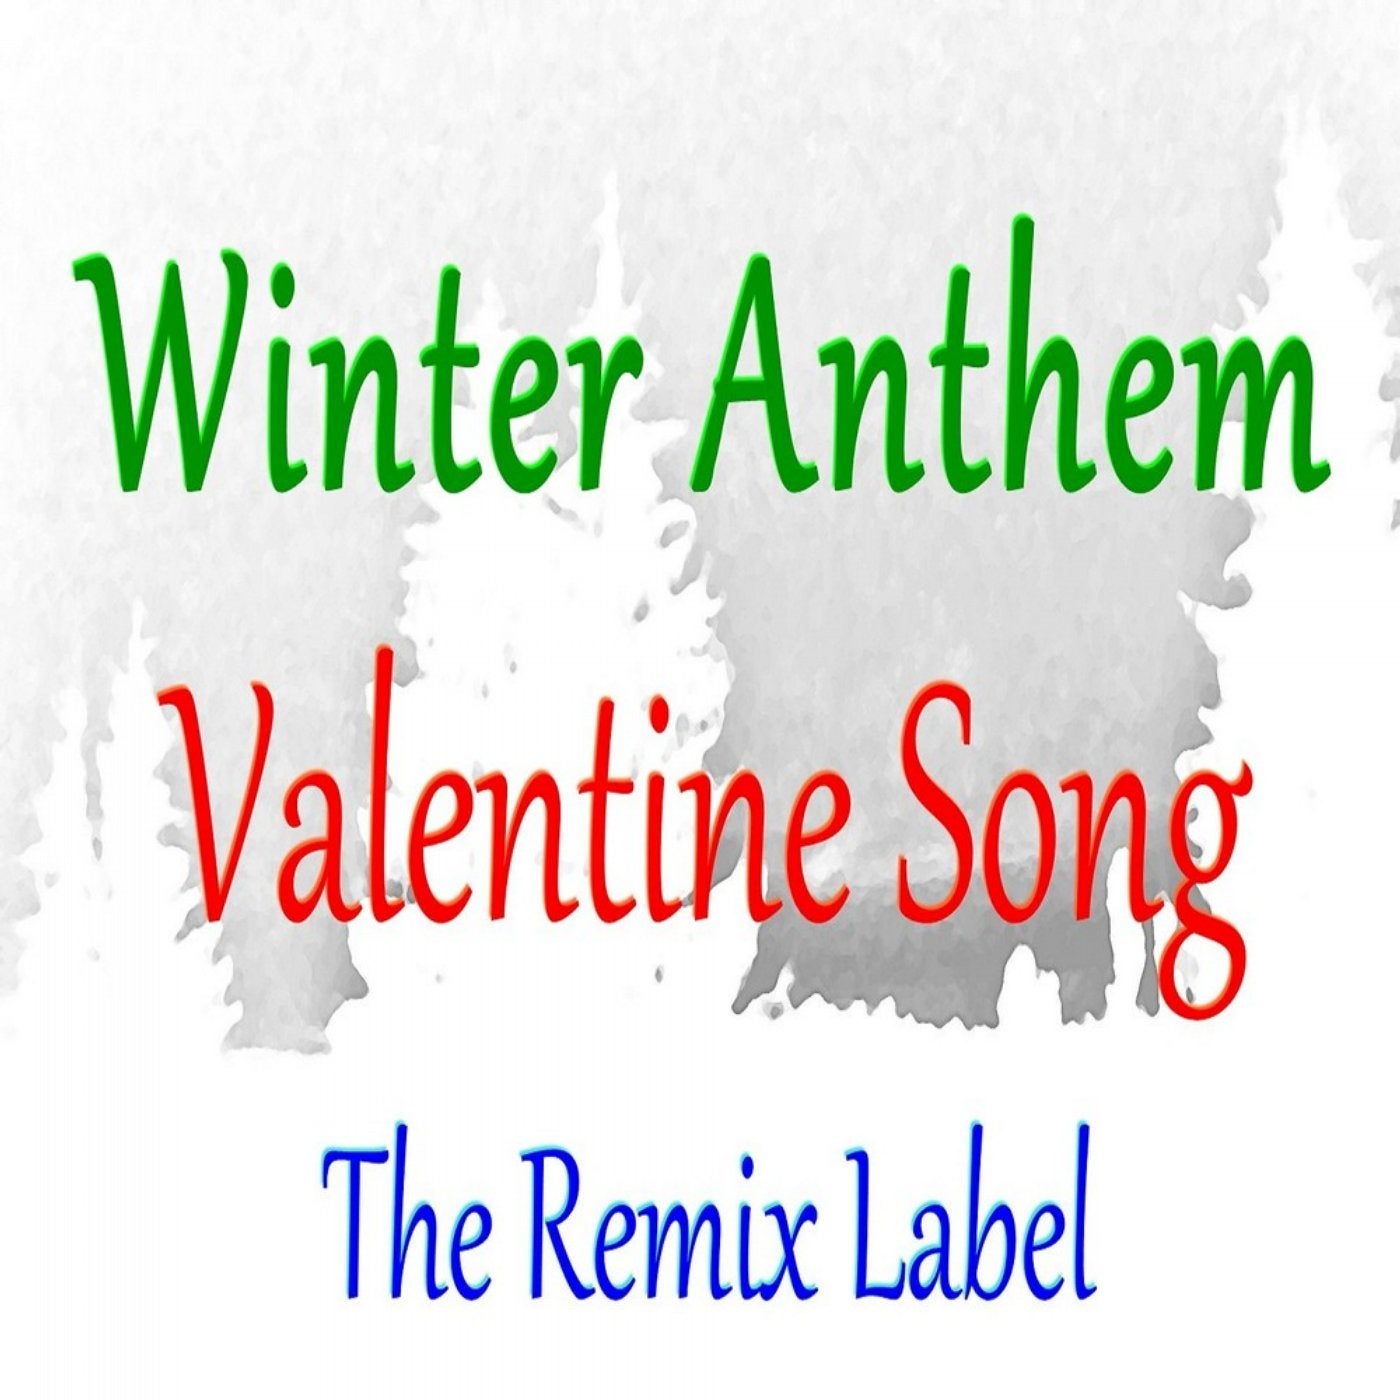 Download Winter Anthem Valentine Song Remix From Worldwide Exclusive Records On Beatport